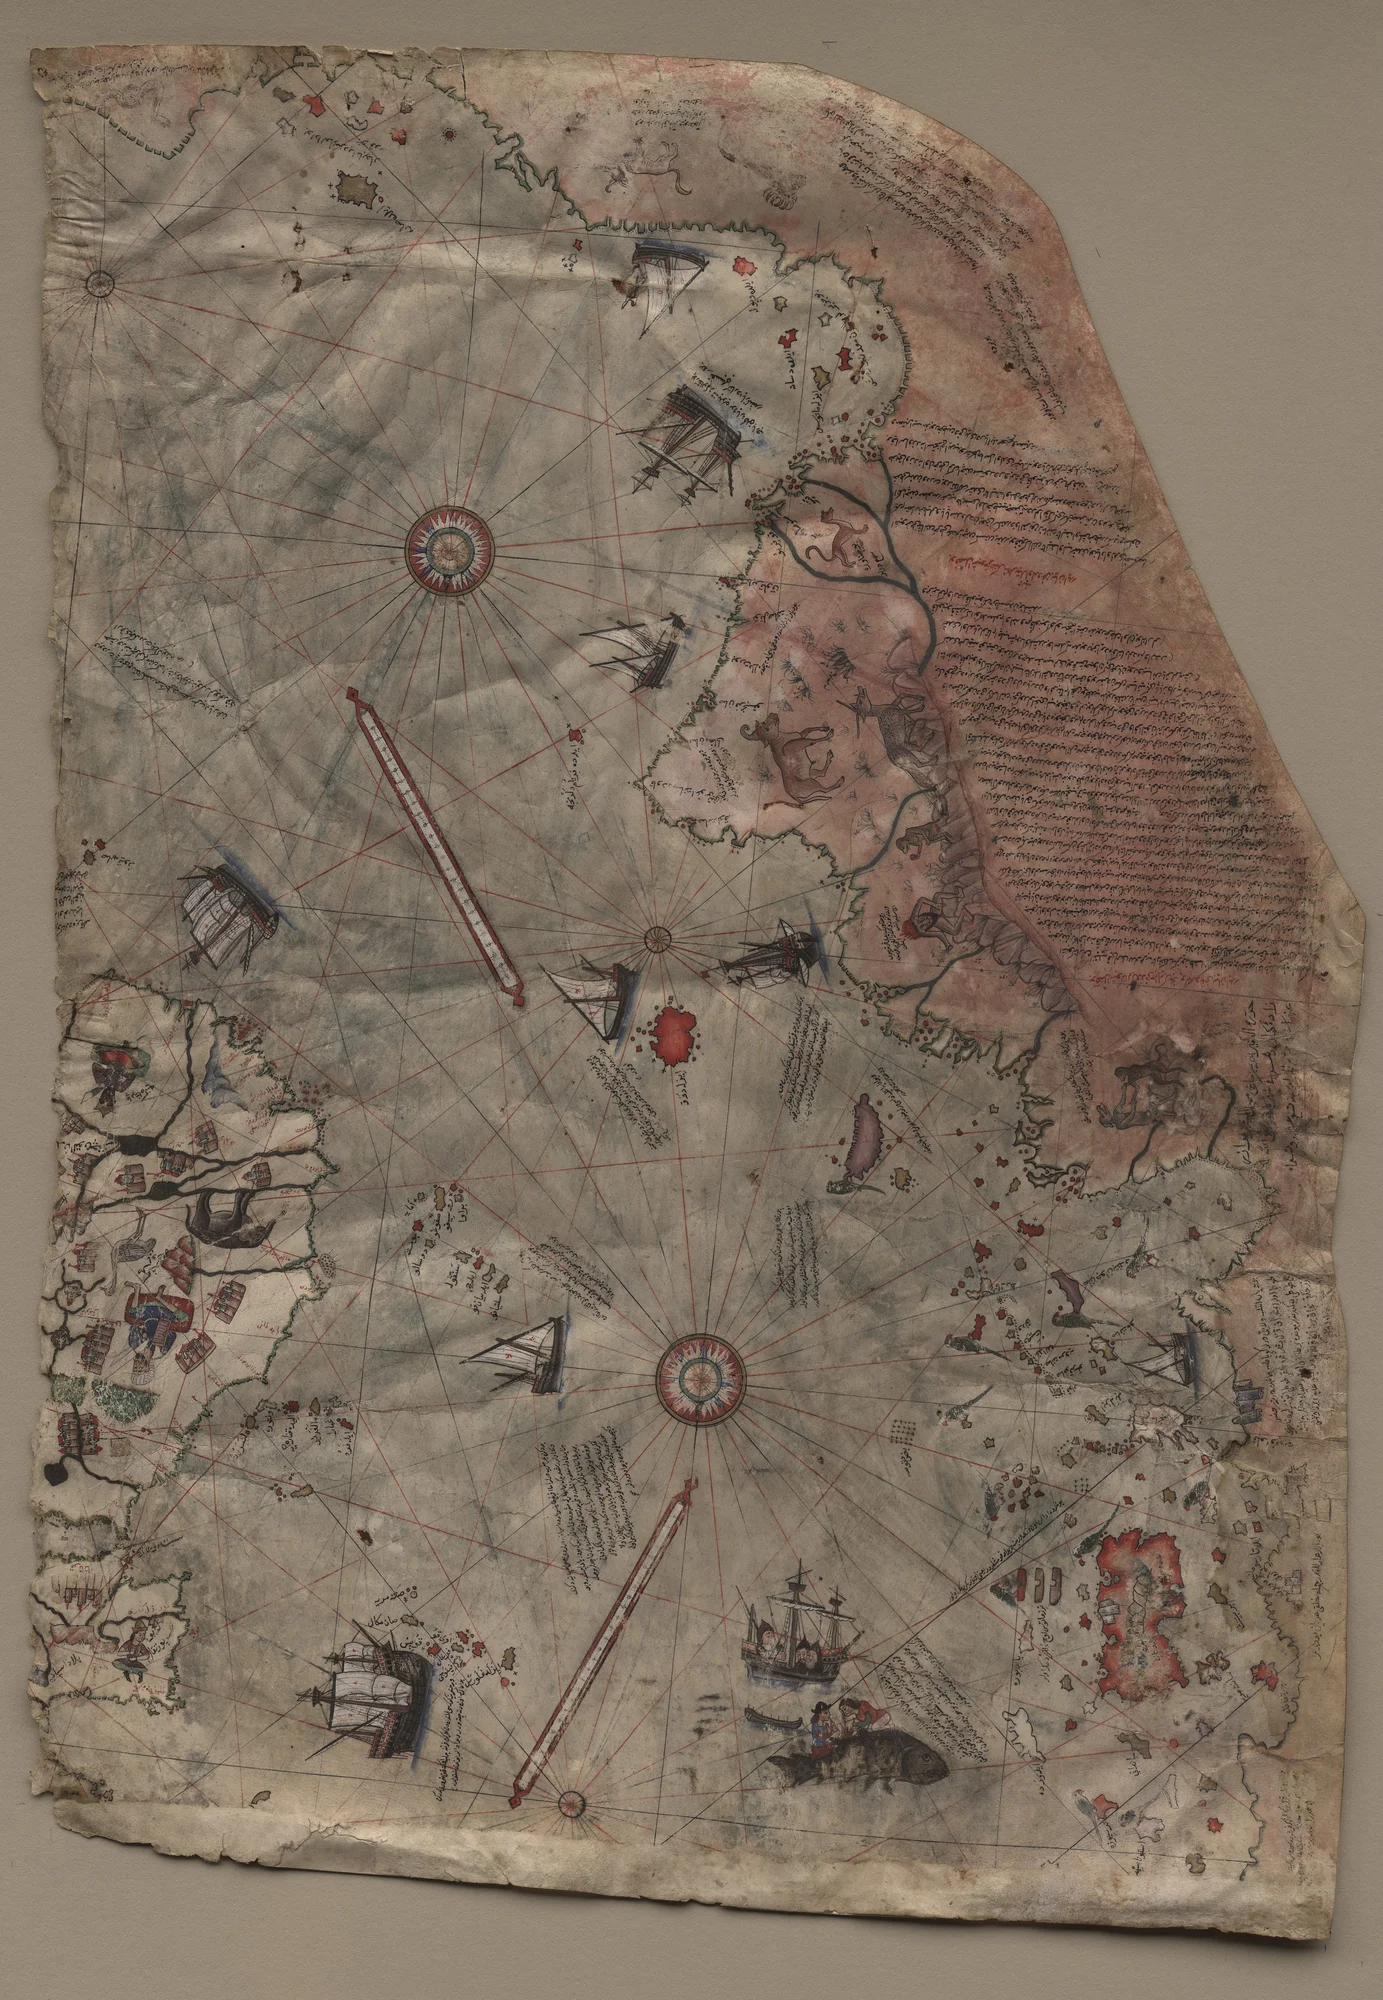 Weathered looking parchment with  map-like drawings and scribbles